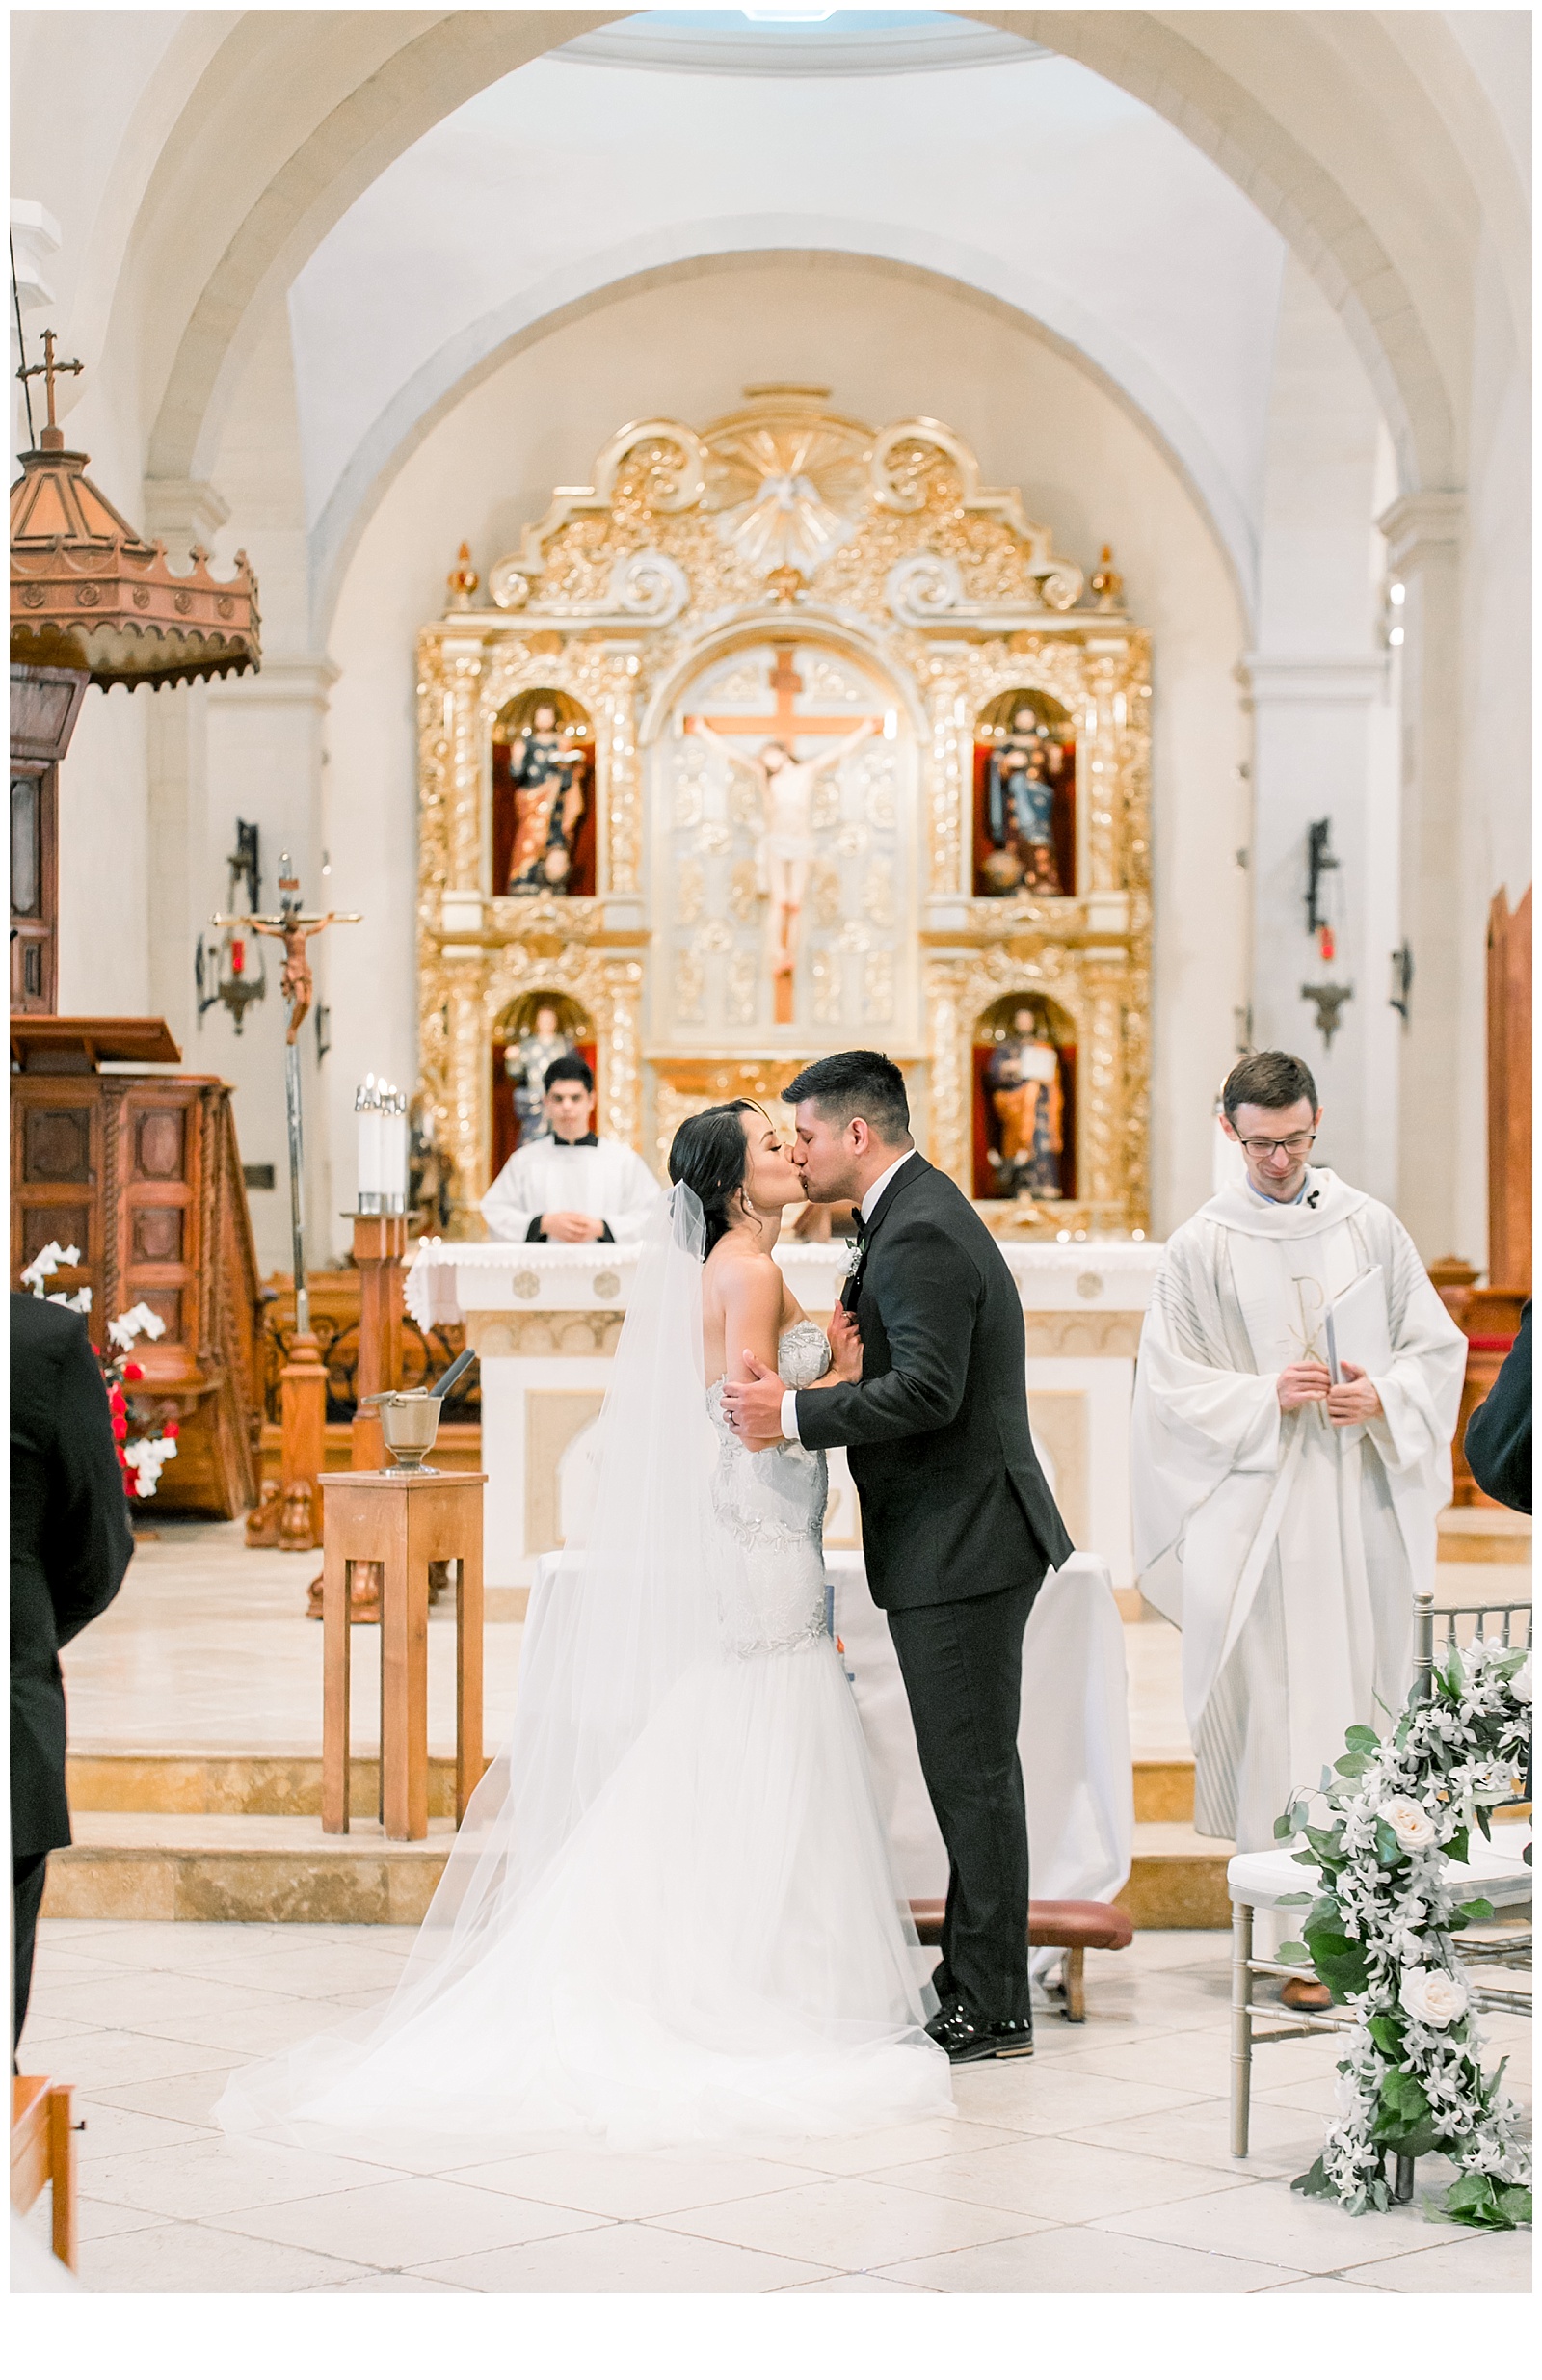 Couples first kiss as husband and wife for A San Fernando Cathedral Wedding in San Antonio, TX | Monica Roberts Photography | www.monicaroberts.com | San Antonio Wedding Photographer